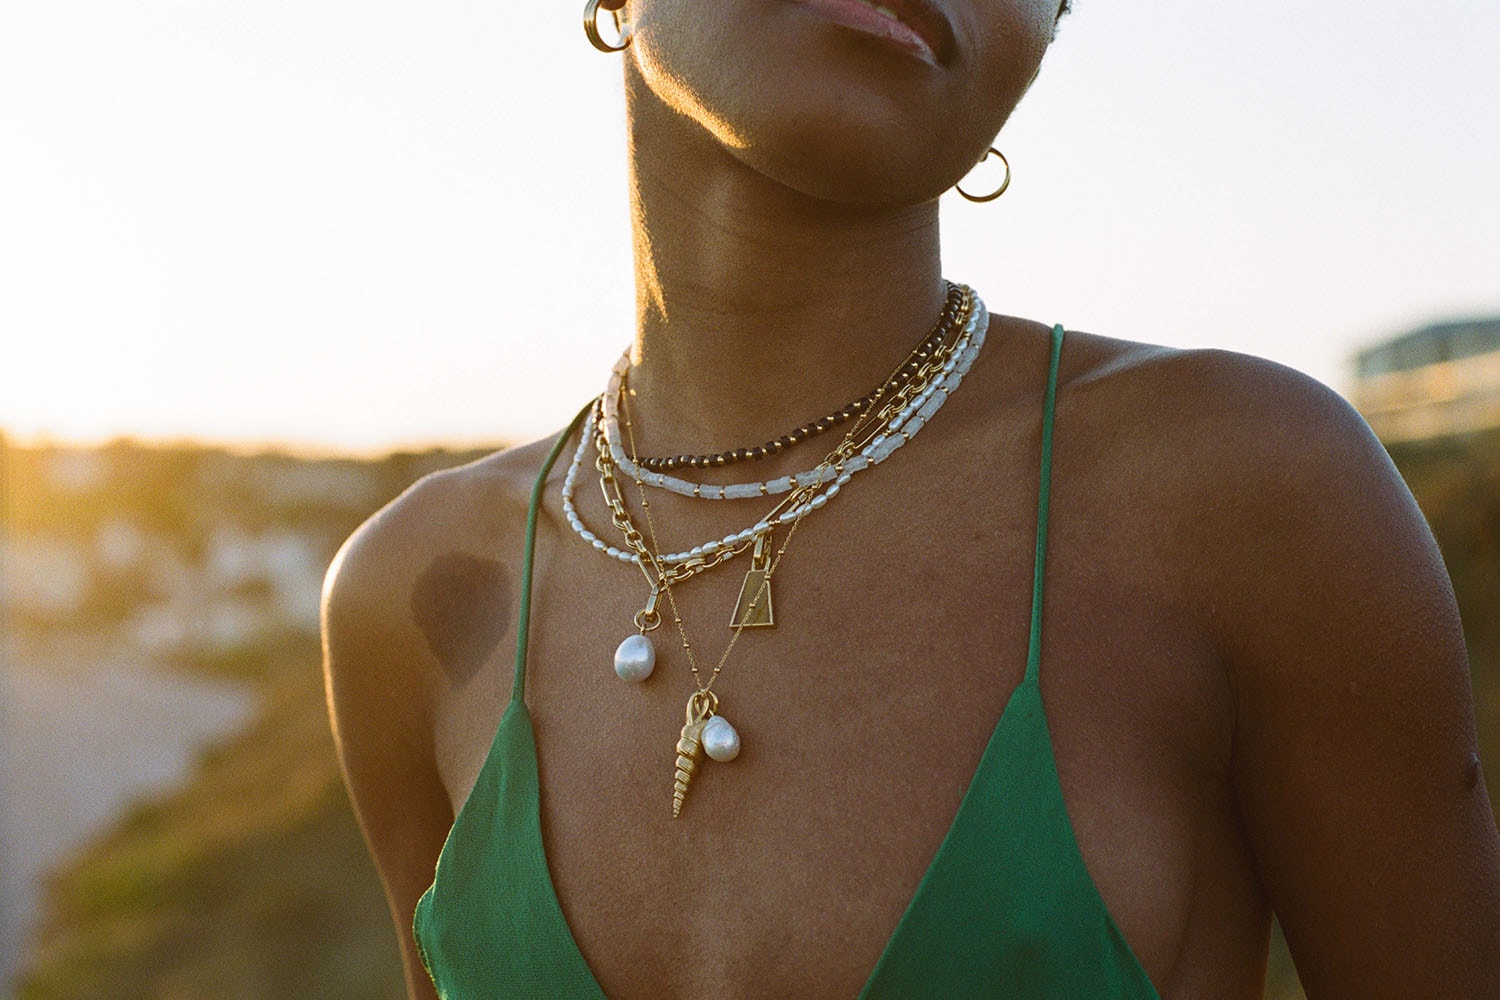 British Jeweler Missoma Launches First Pearls Collection Summer 2021